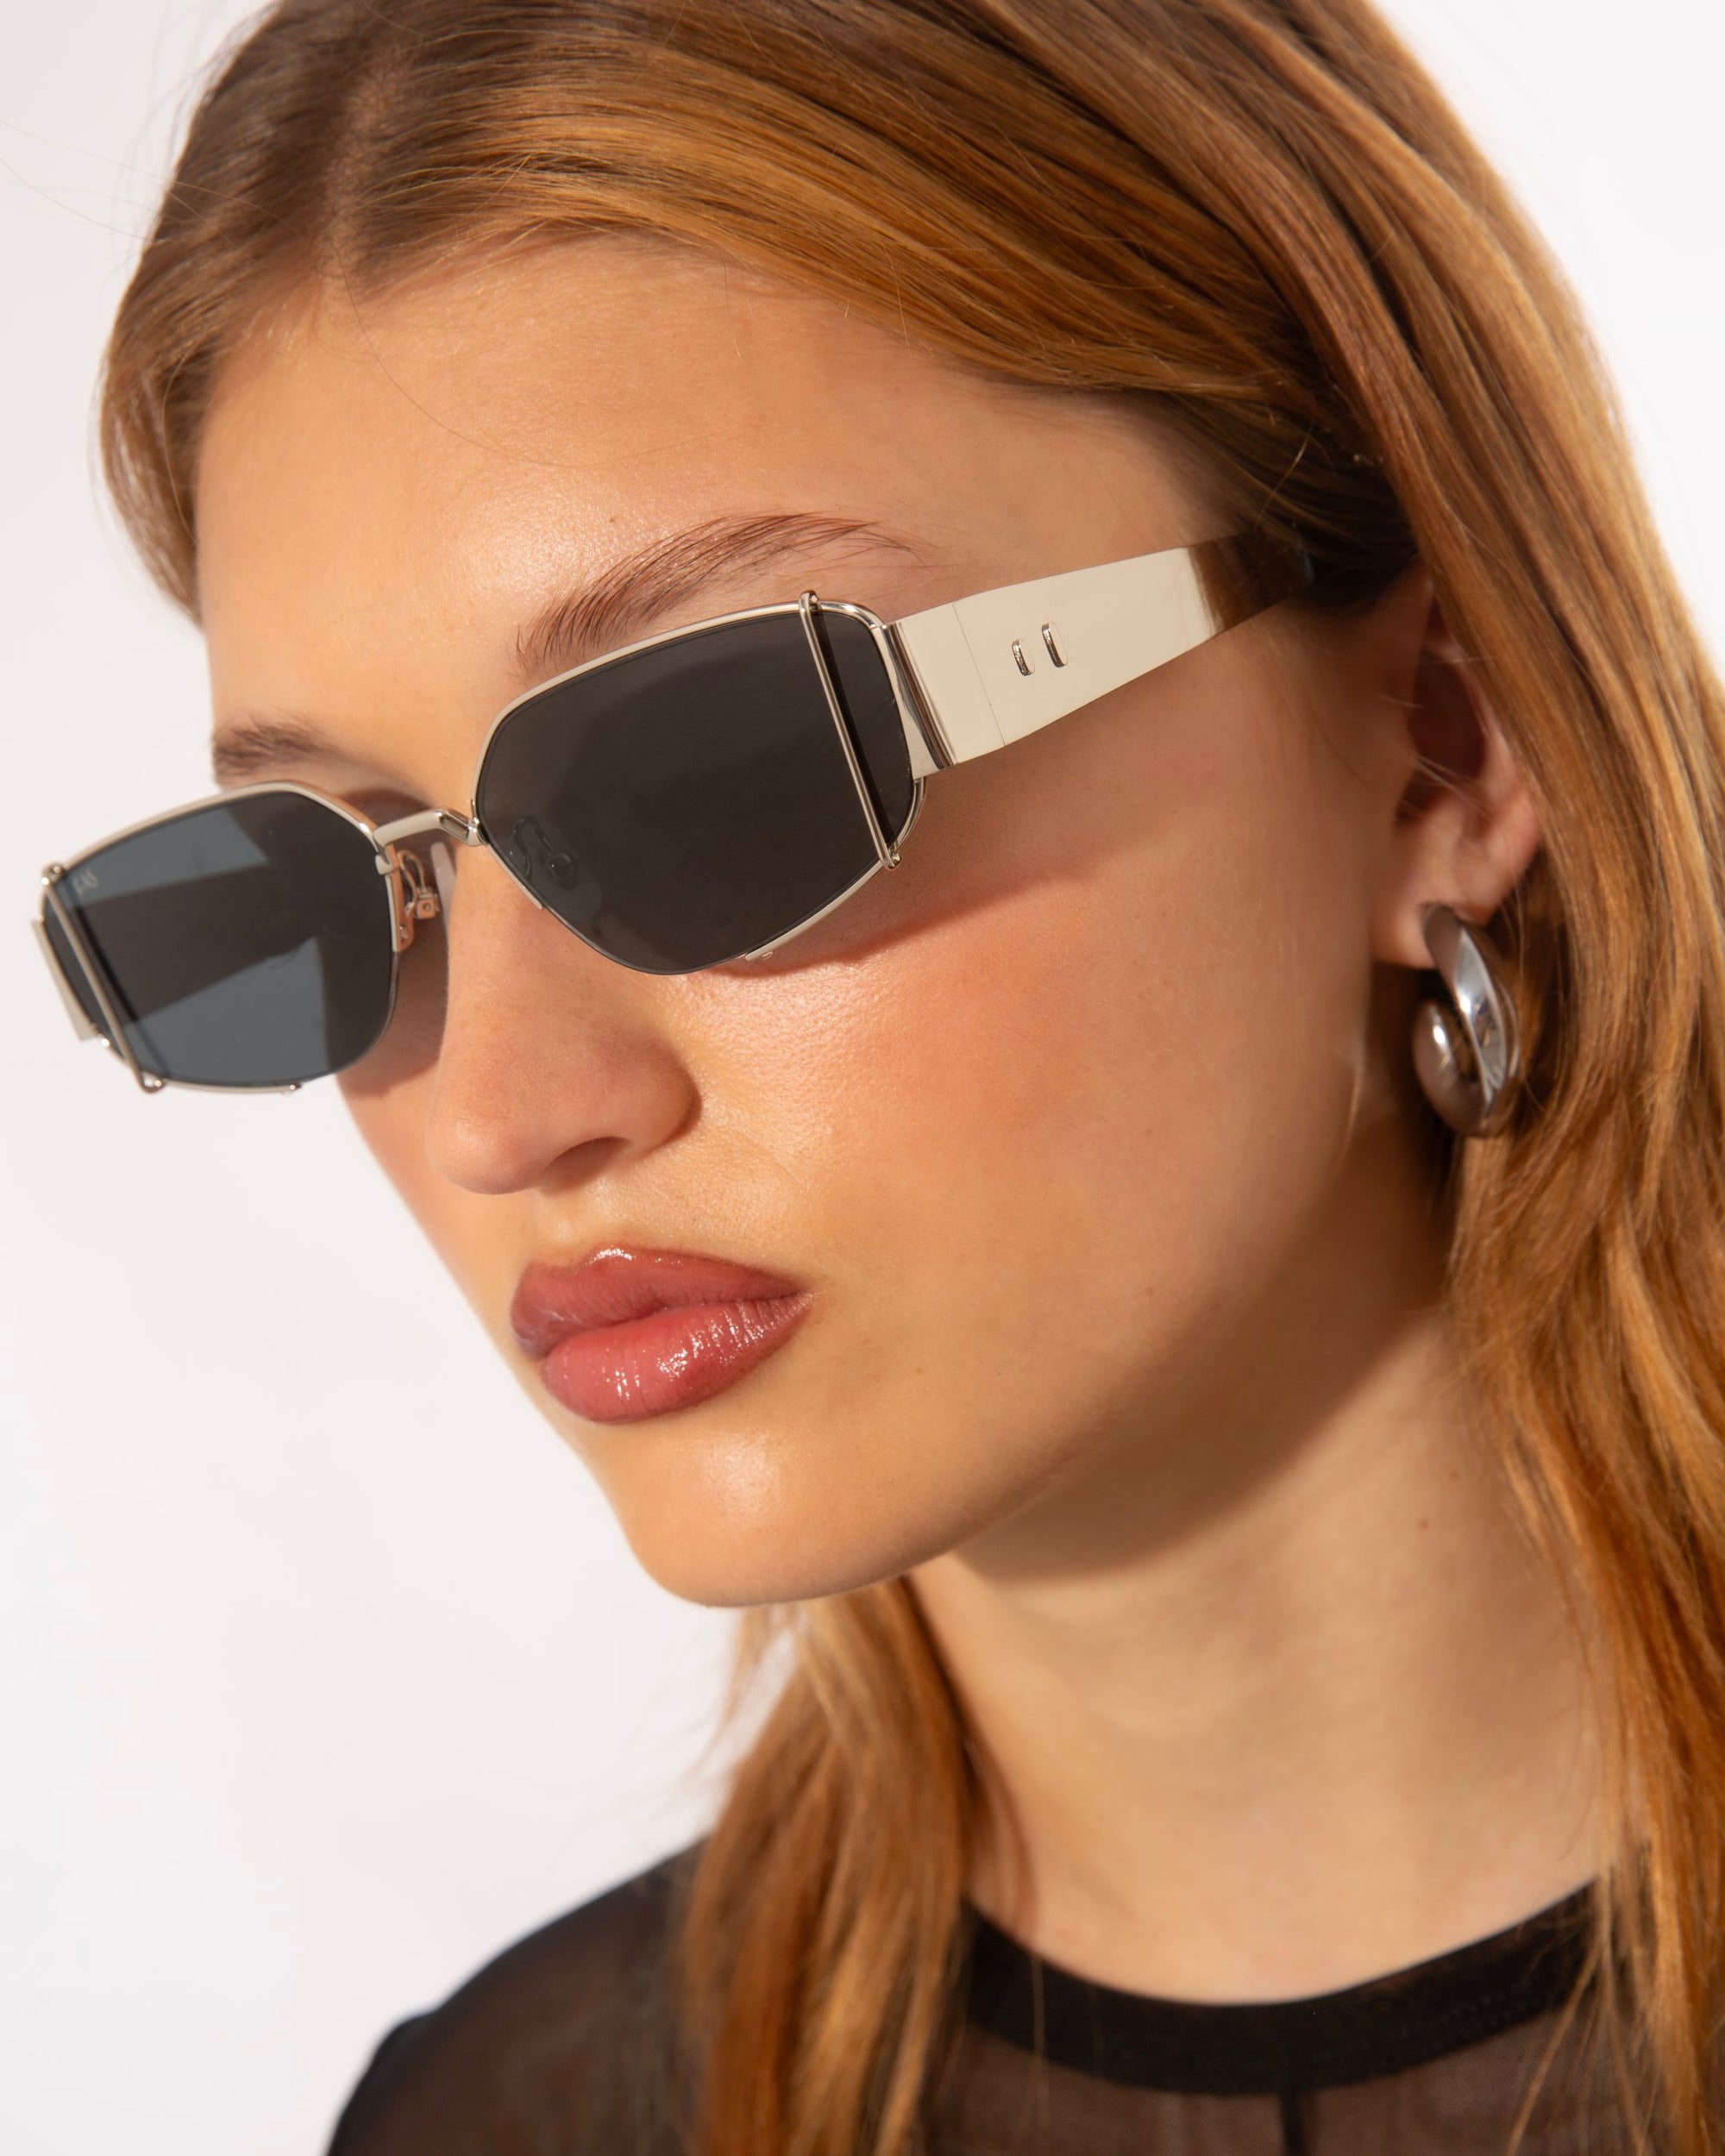 Close-up of a person with long light brown hair wearing modern angular Talia sunglasses from For Art&#39;s Sake® featuring thick white frames. They have neutral makeup and are also wearing large, silver hoop earrings. The background is plain and white, highlighting the accessories.